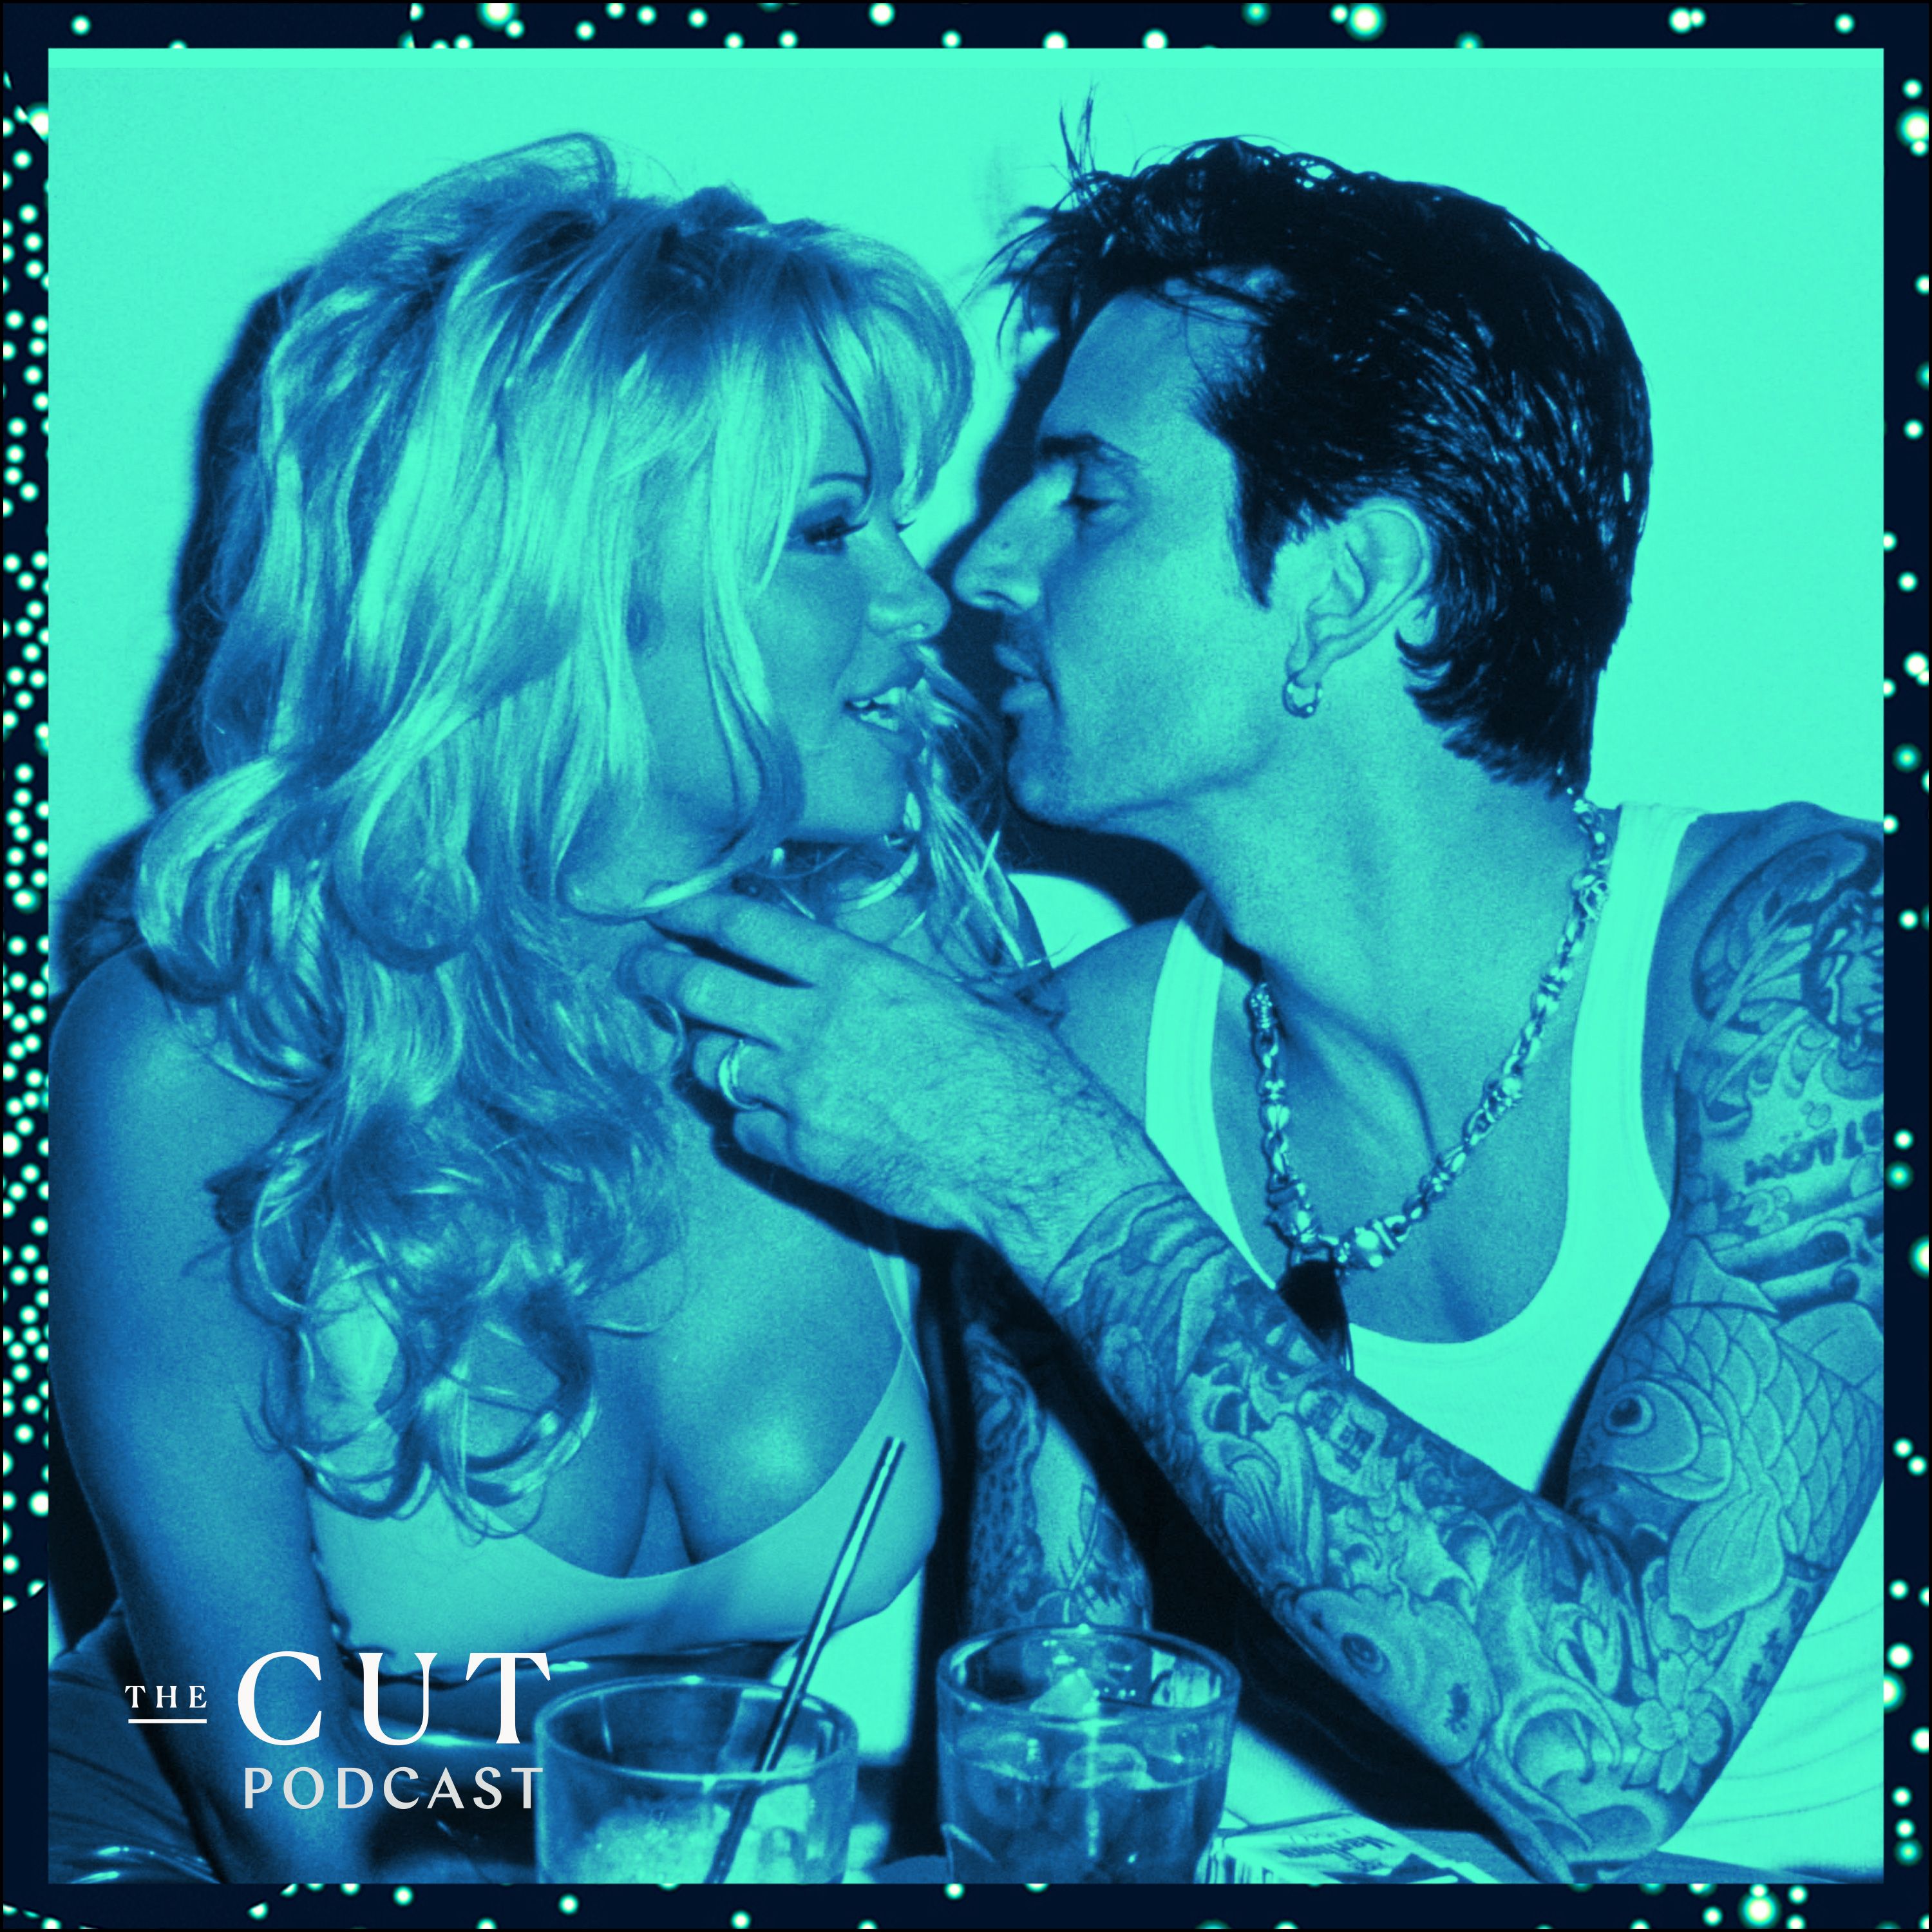 Jenny Mccarthy Sex Fuck - The Cut Podcast: The Lovers, From Tabloid